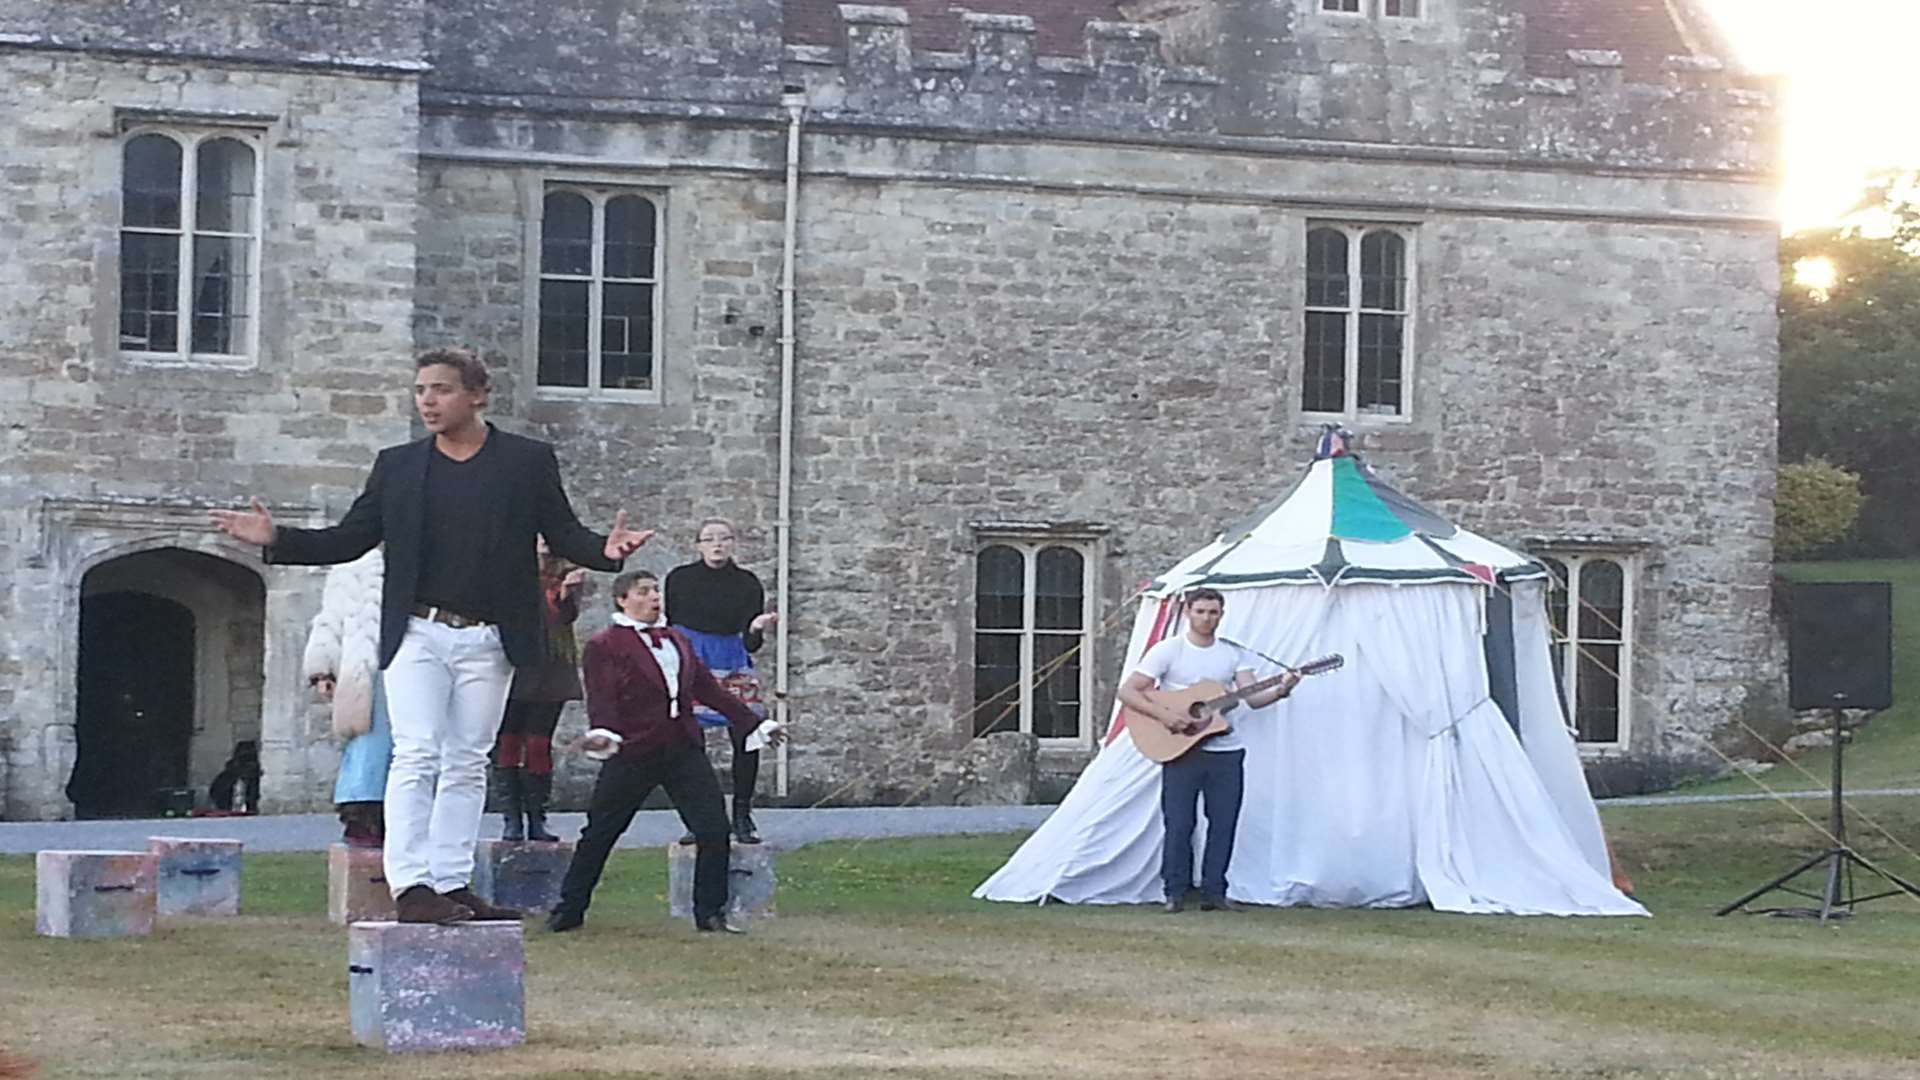 The Changeling Theatre's summer tour finale will be back at Boughton Monchelsea Place, Maidstone